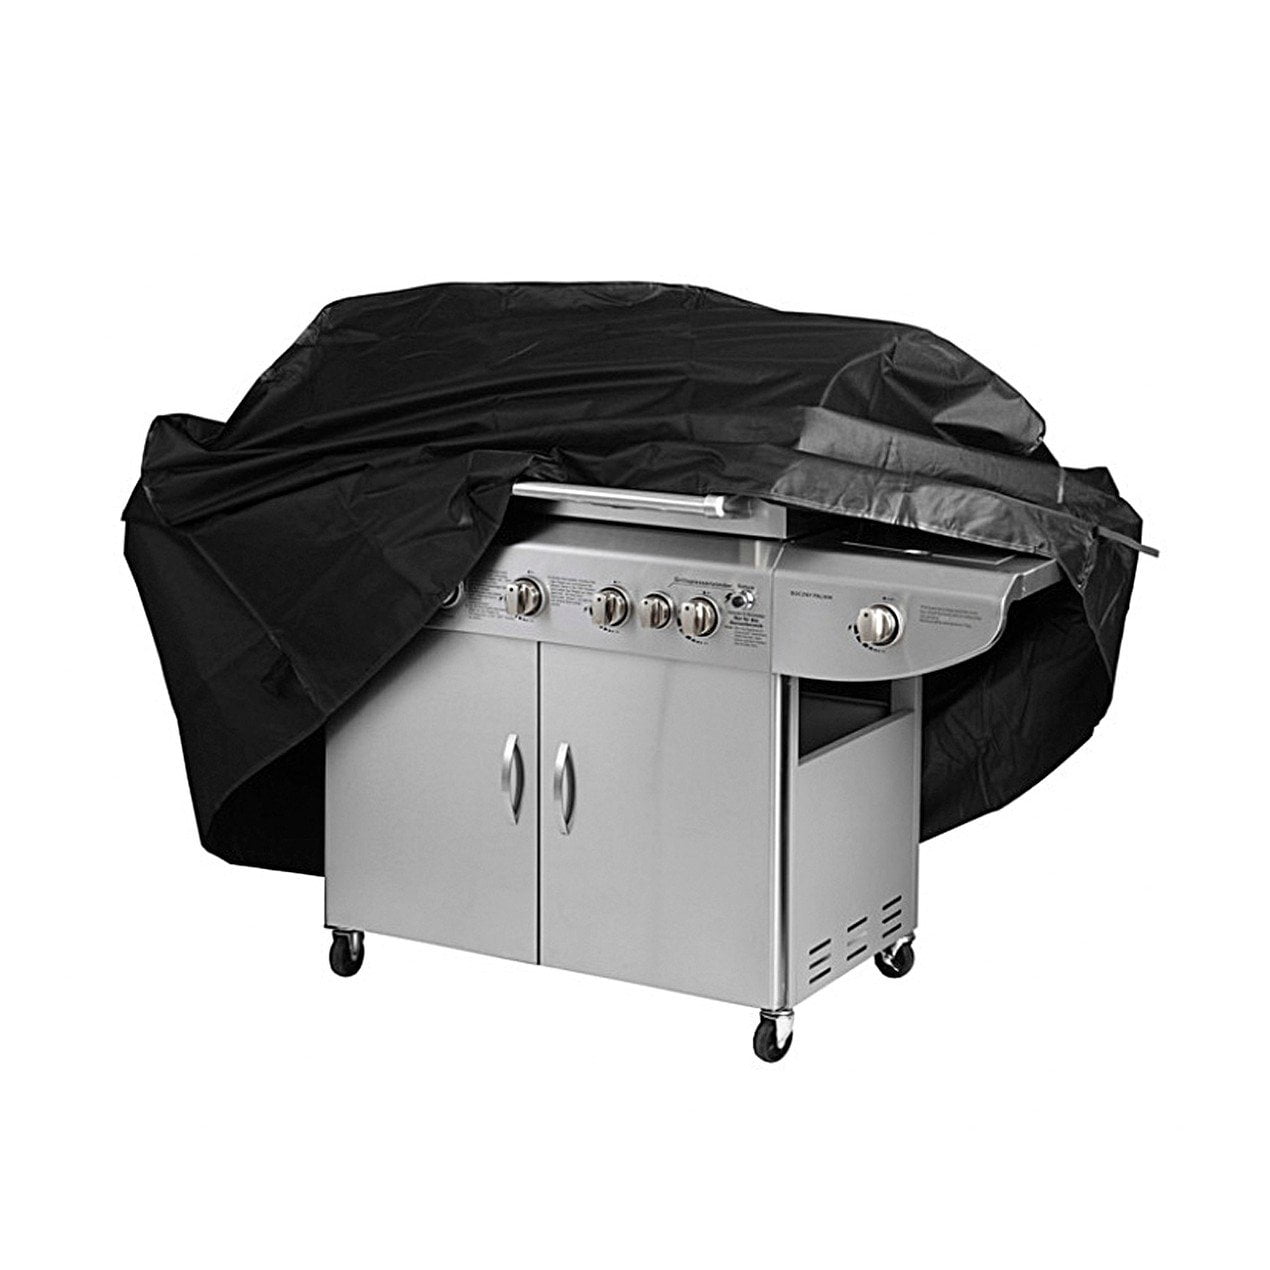 Details about  / BBQ Grill Cover 37/"-75/" Gas Barbecue Heavy UV Duty Protection Waterproof Outdoor